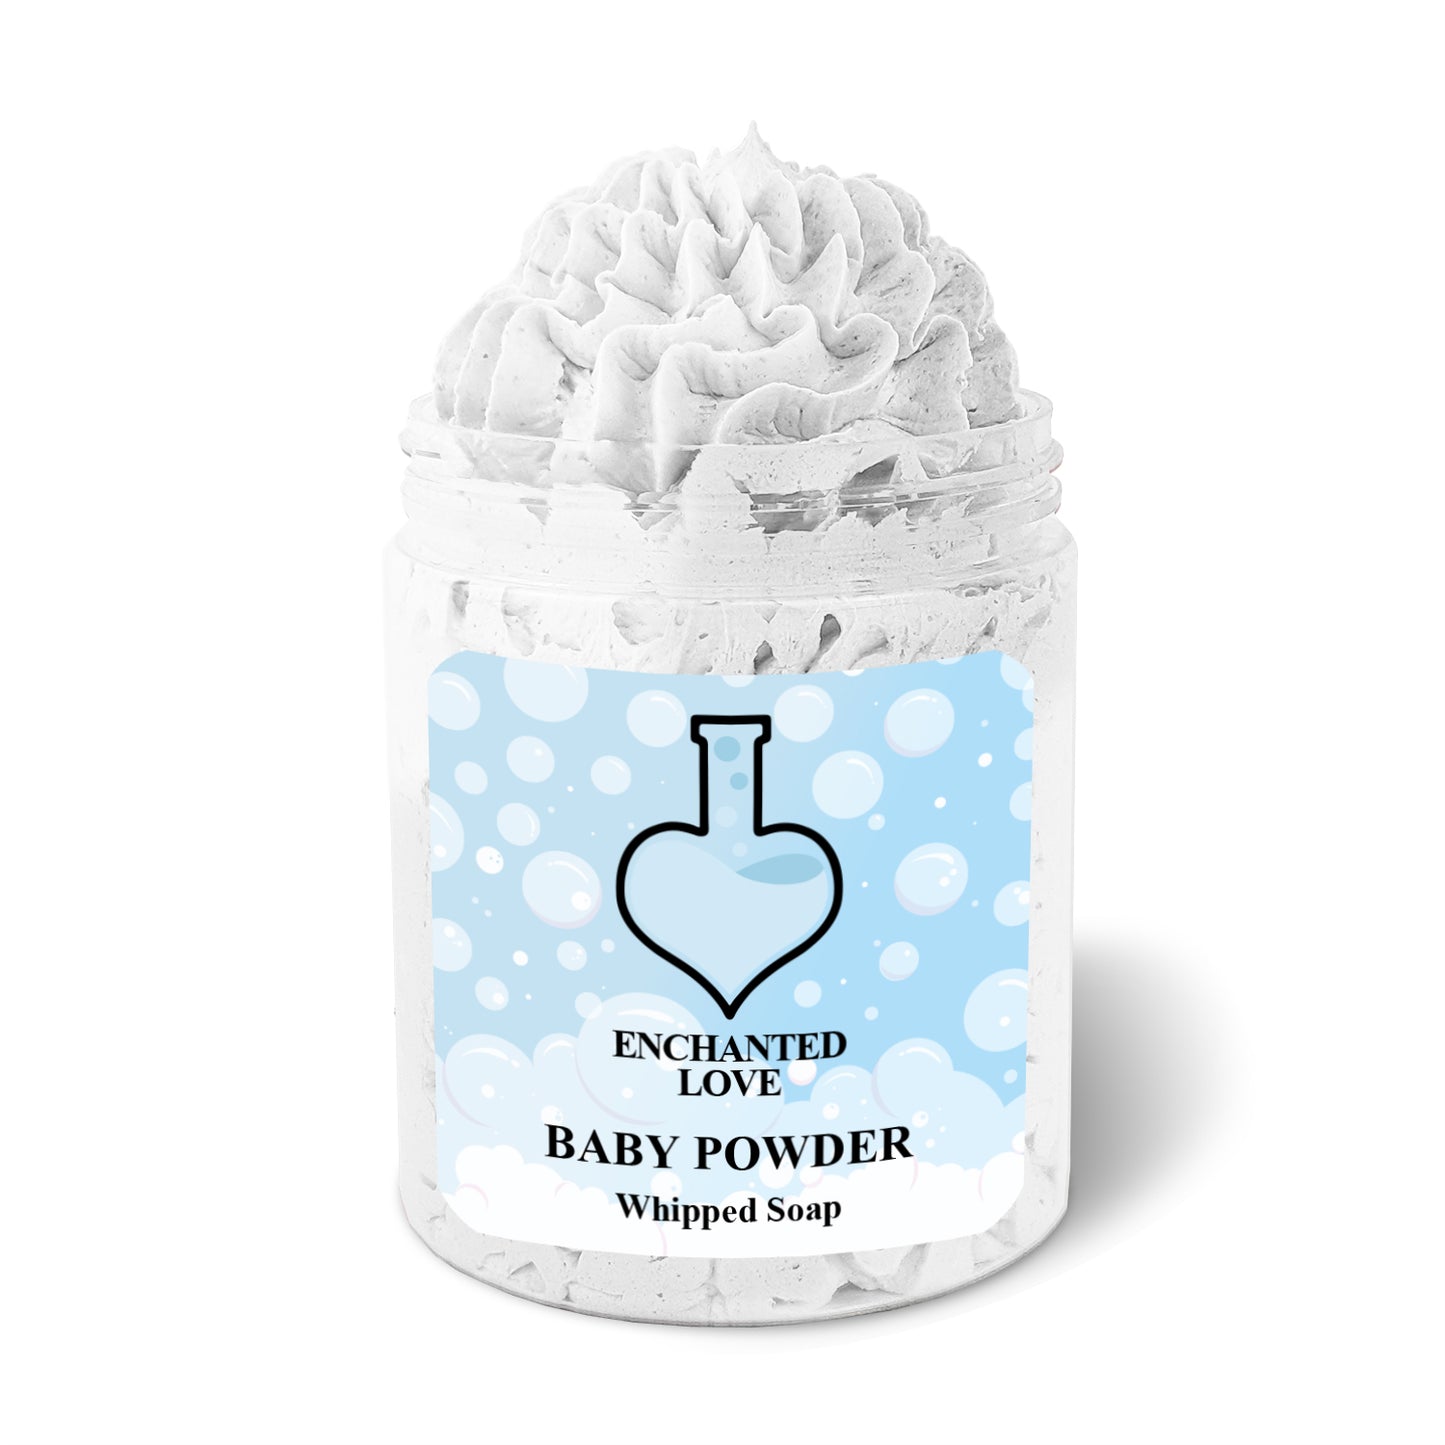 Baby Powder Whipped Soap